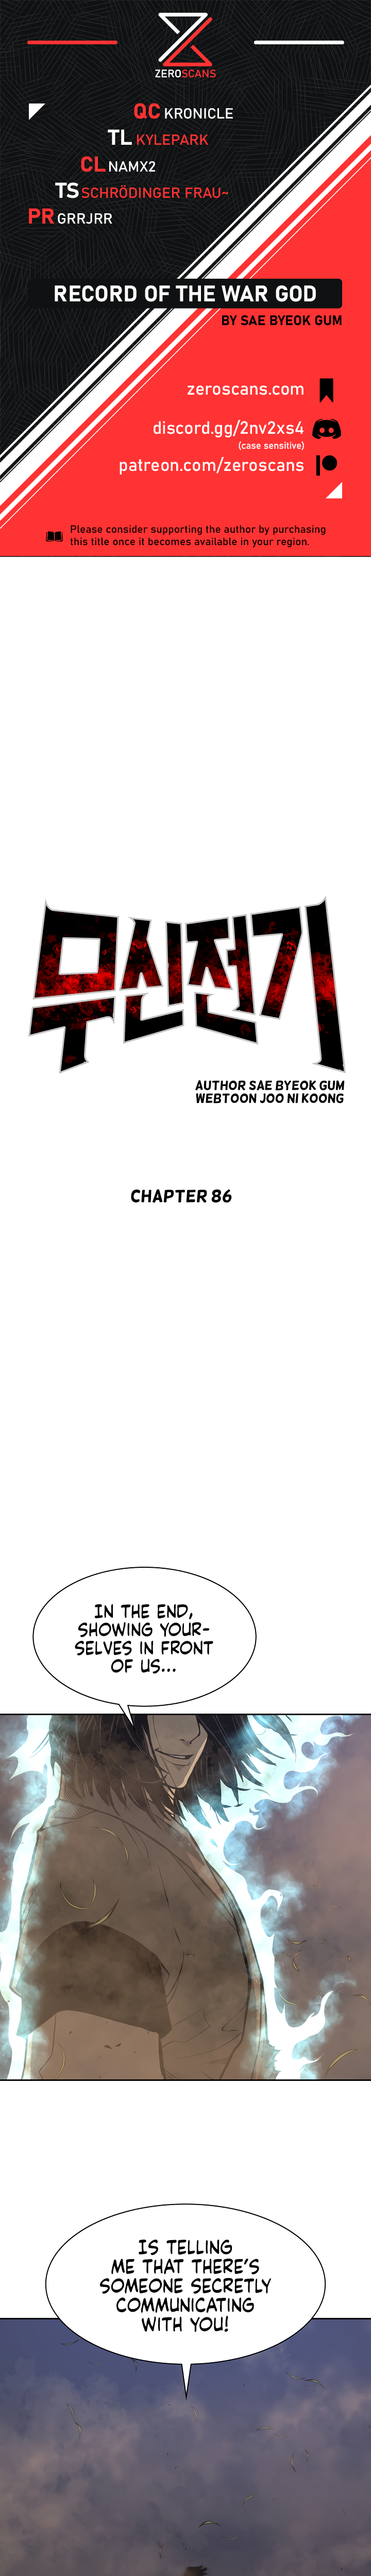 Record of the War God - Chapter 5962 - Image 1